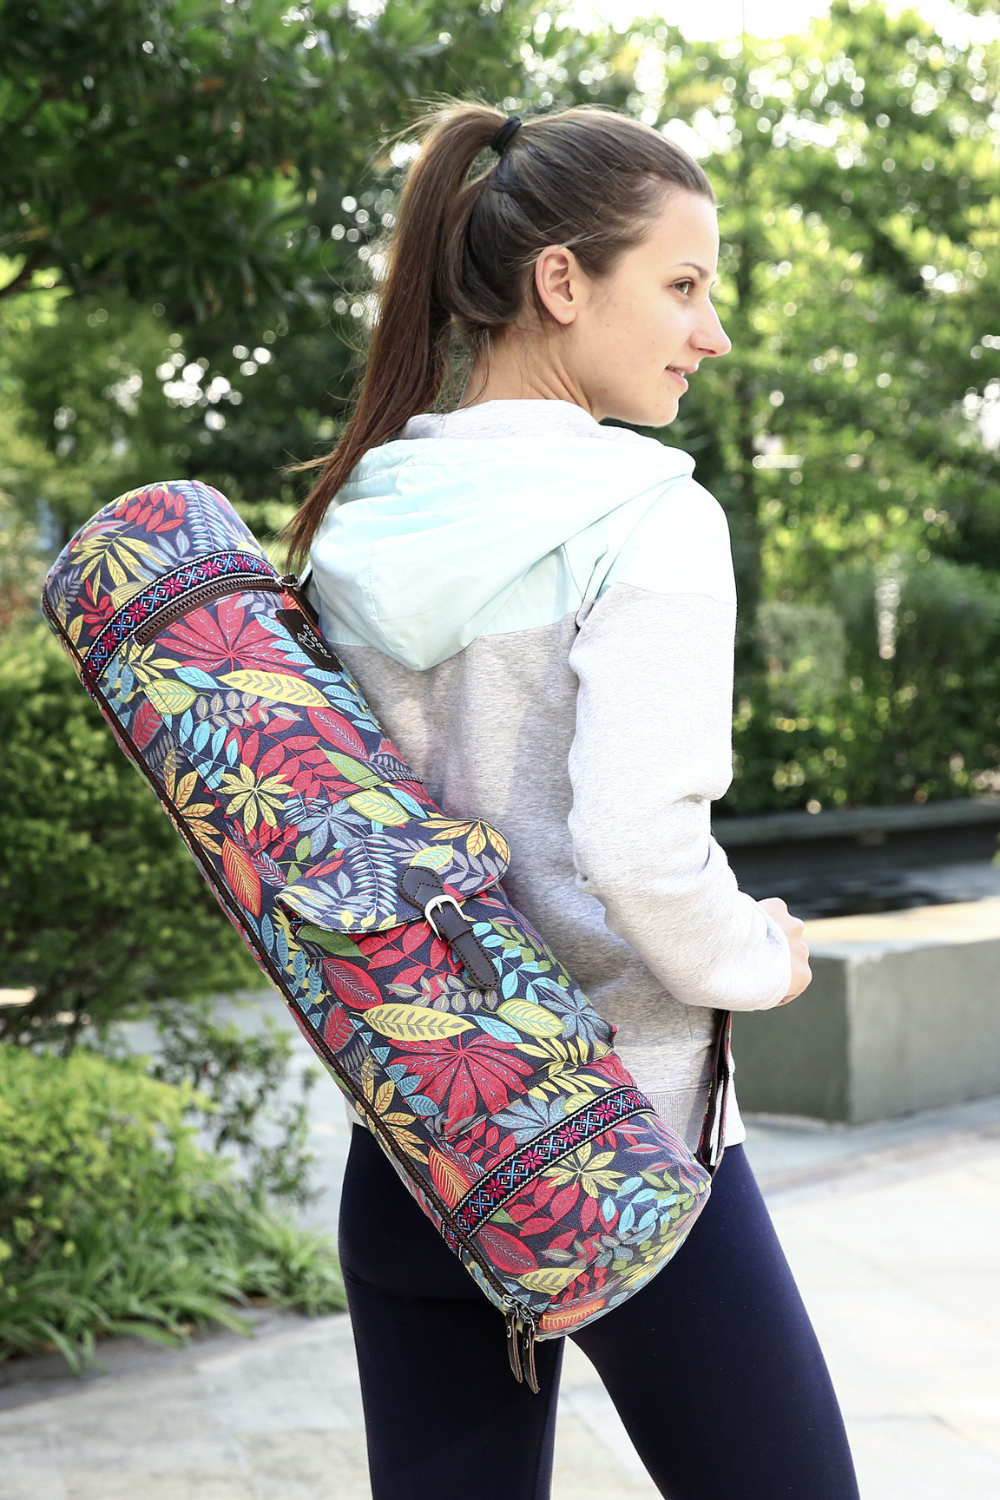 Eco-Friendly Cotton Carrying Bag for Yoga Mats - With Two Additional Pockets